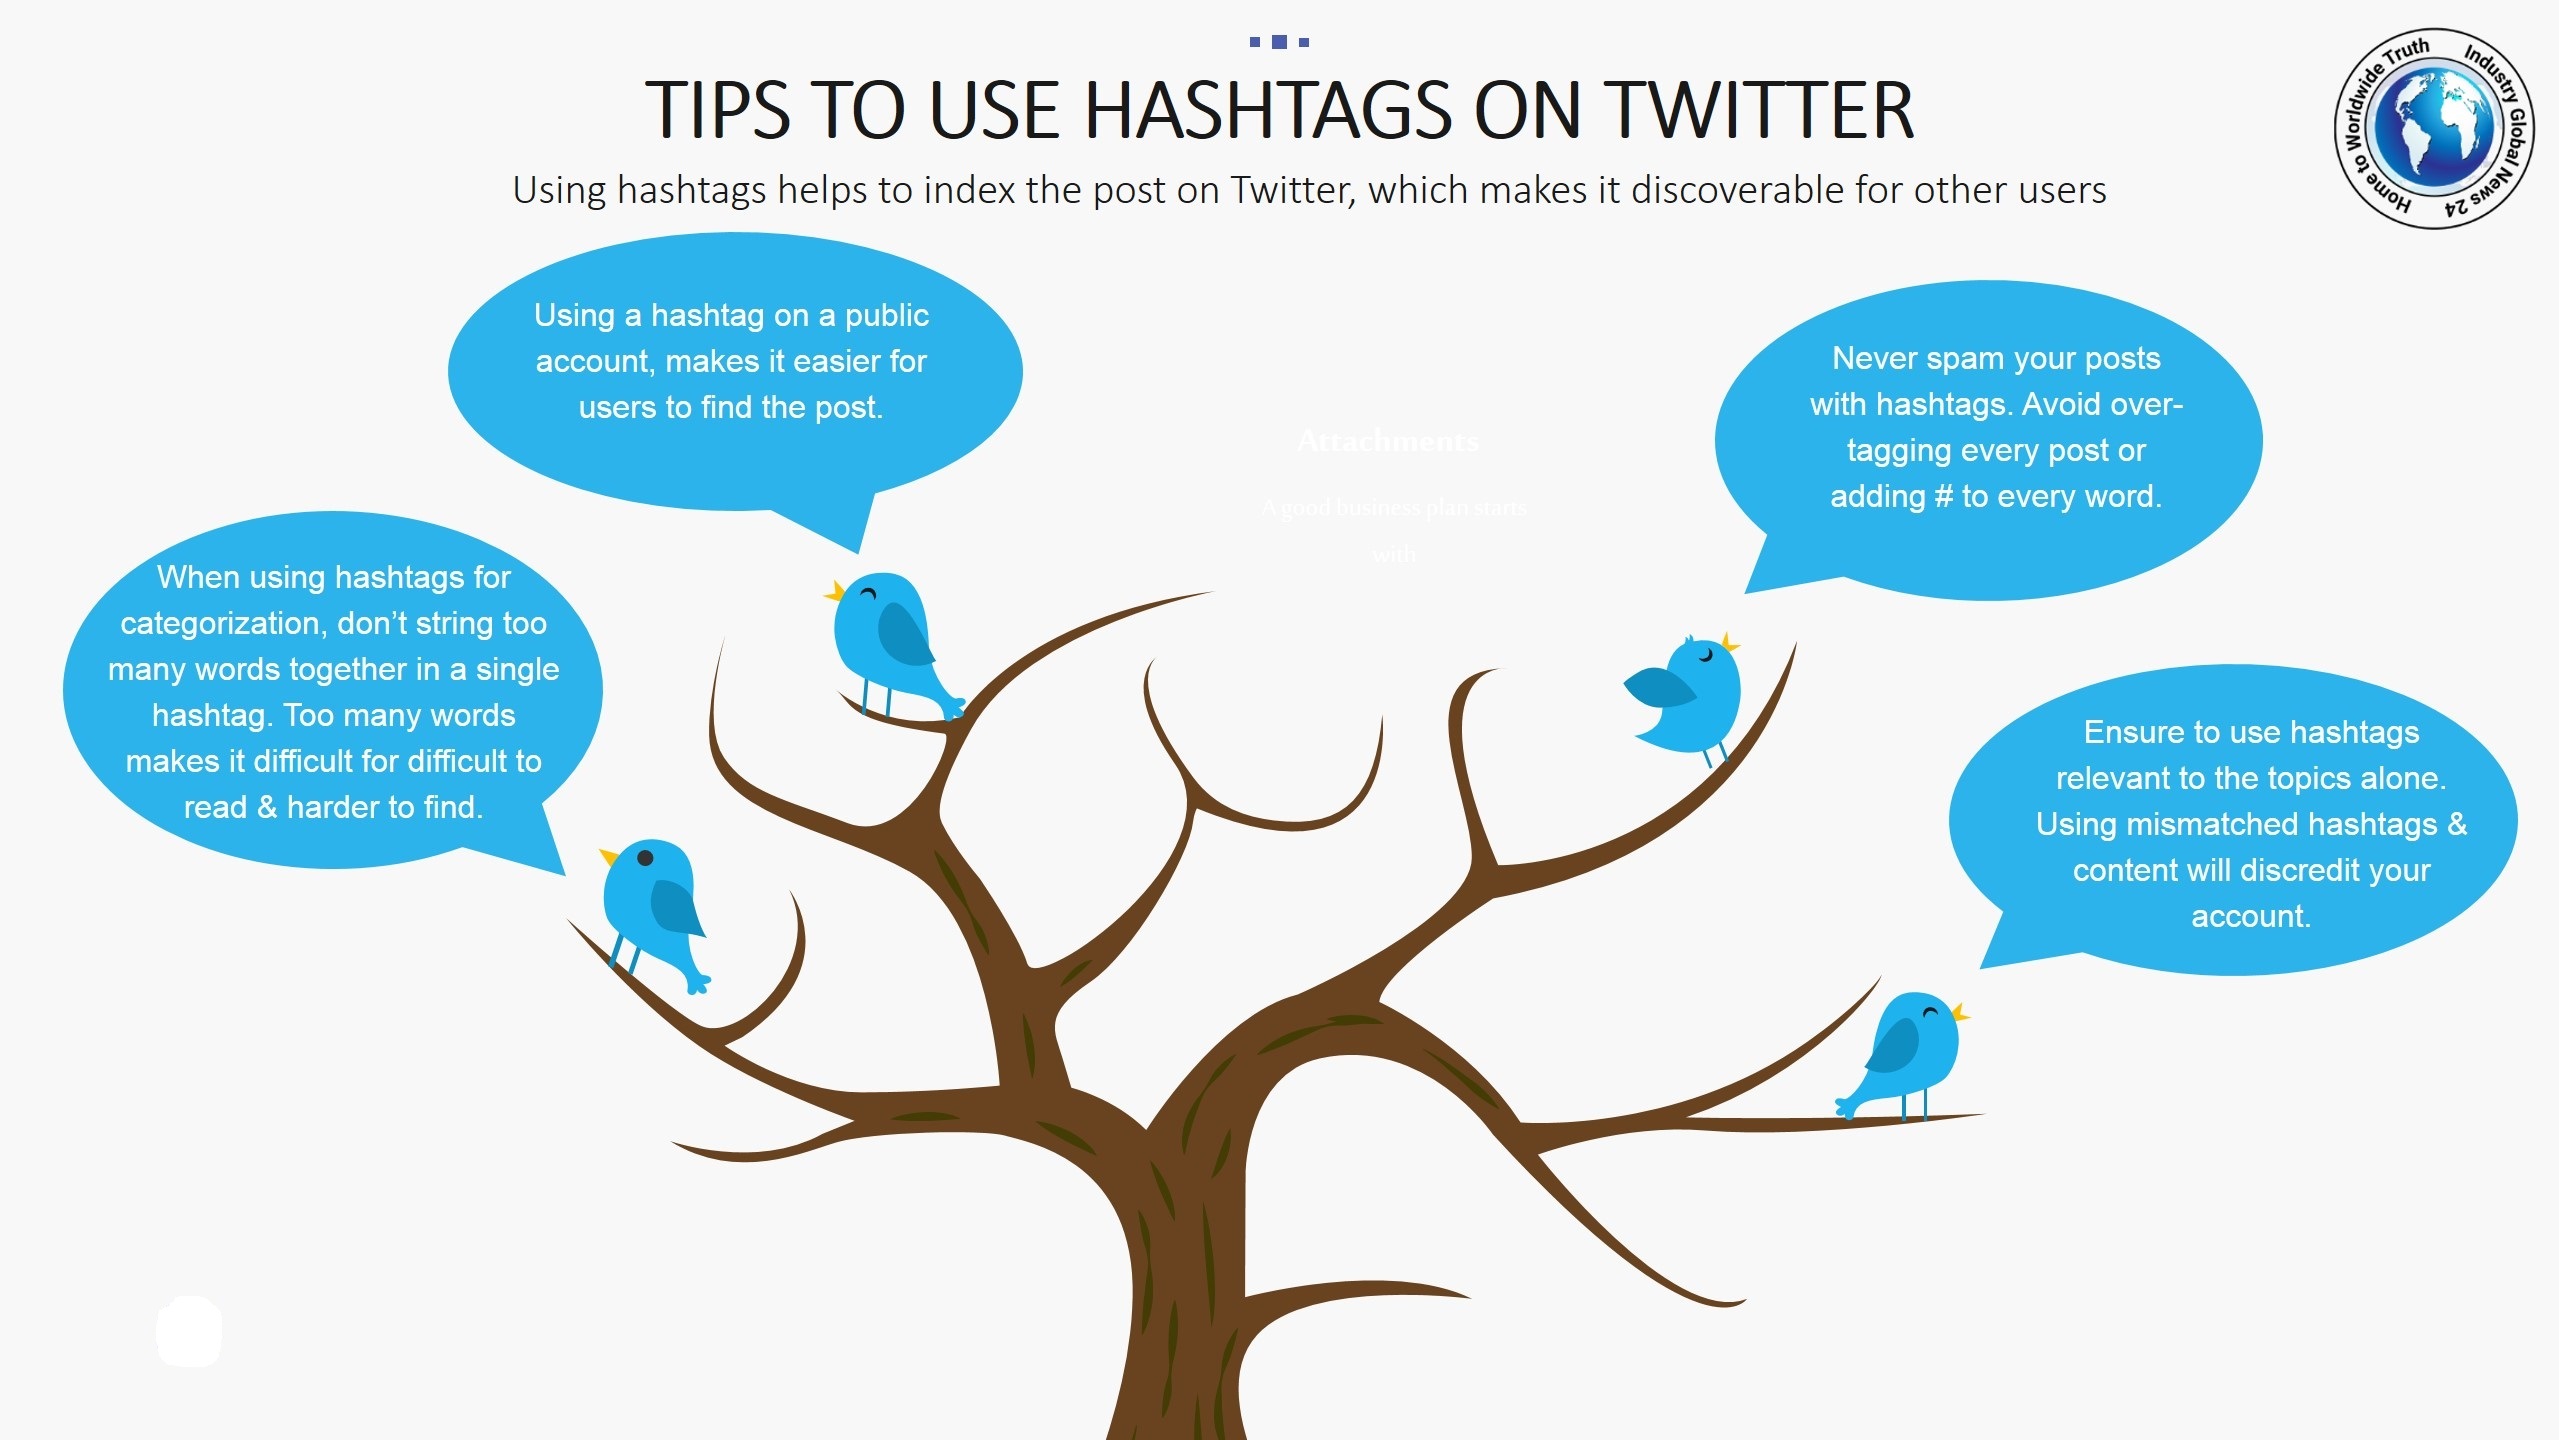 Tips to use hashtags on Twitter